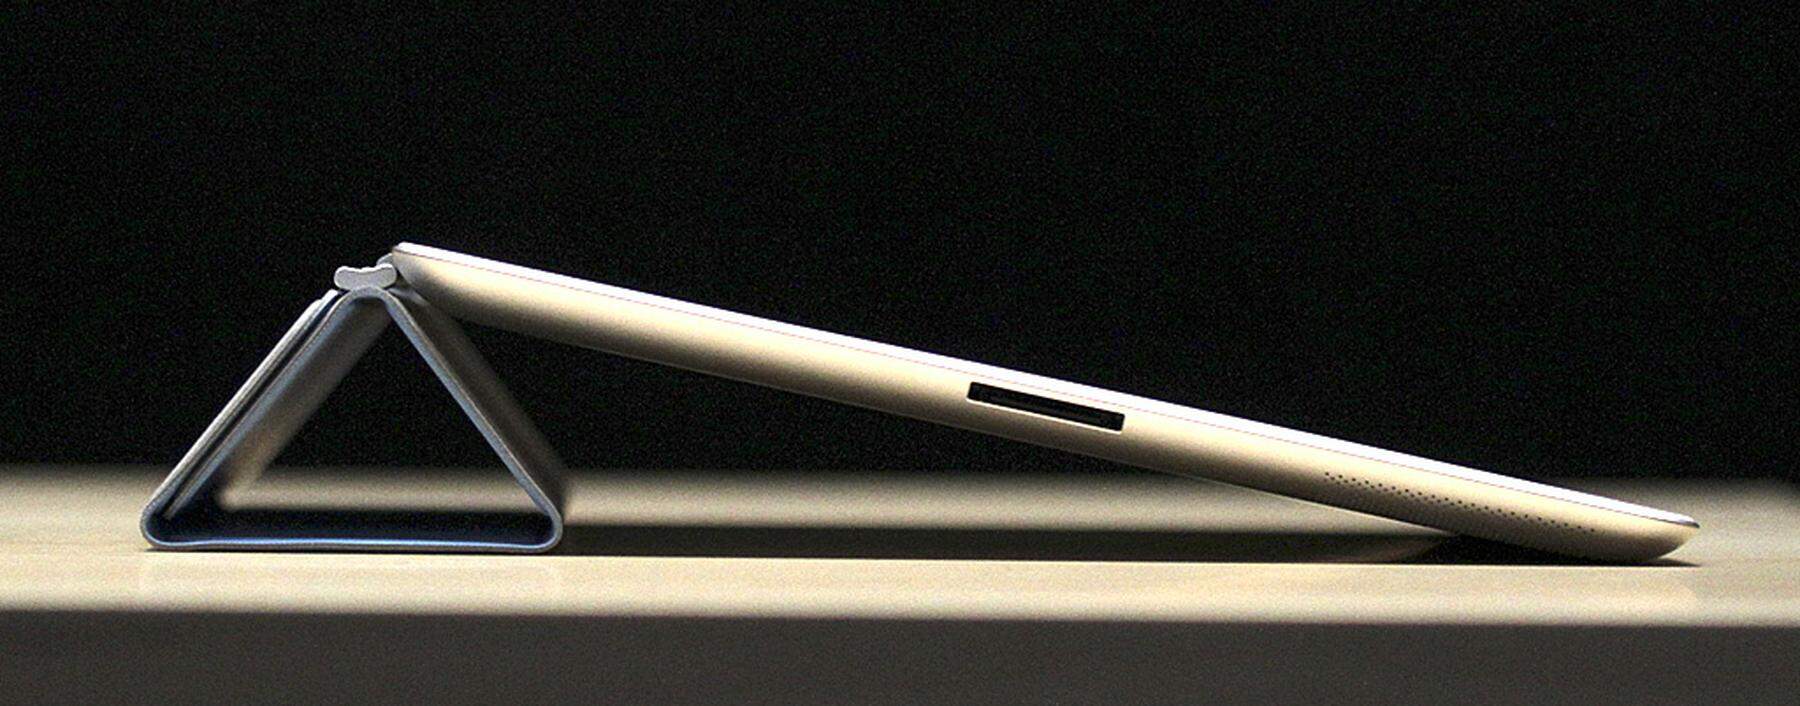 The profile of the Apple iPad 2 is shown during its launch event in San Francisco